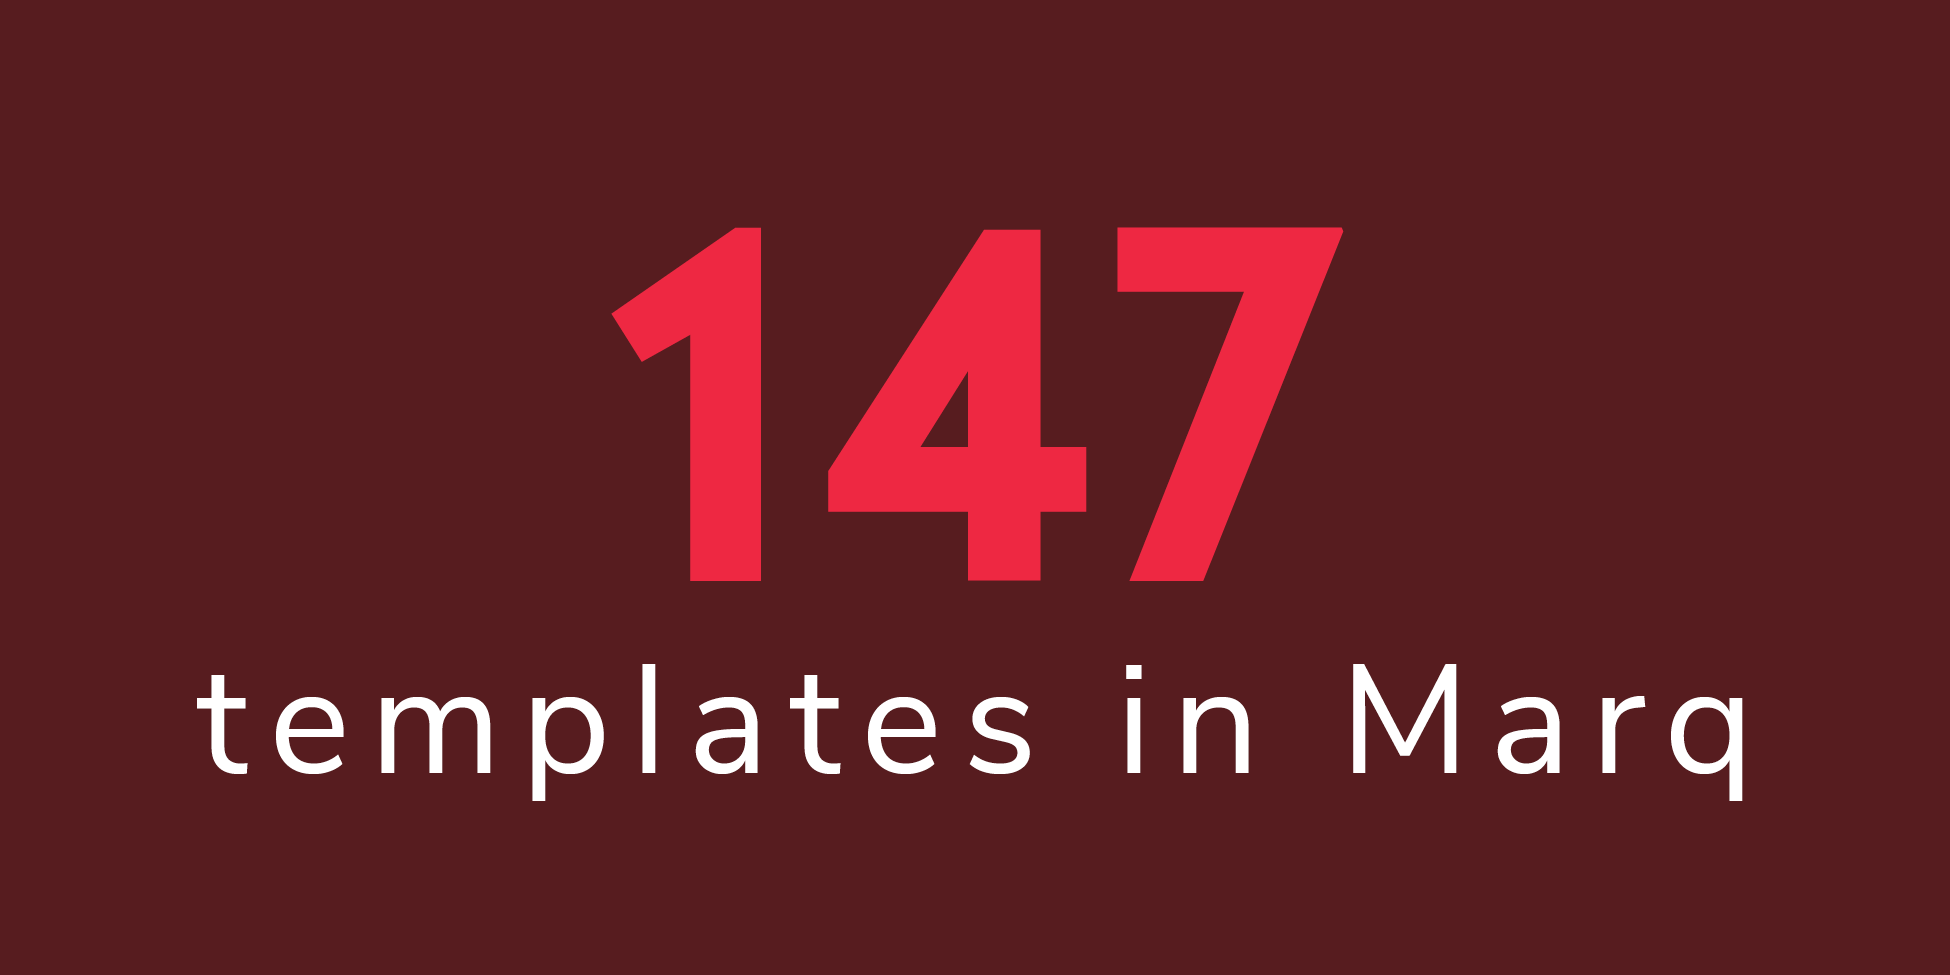 147 templates in Marq